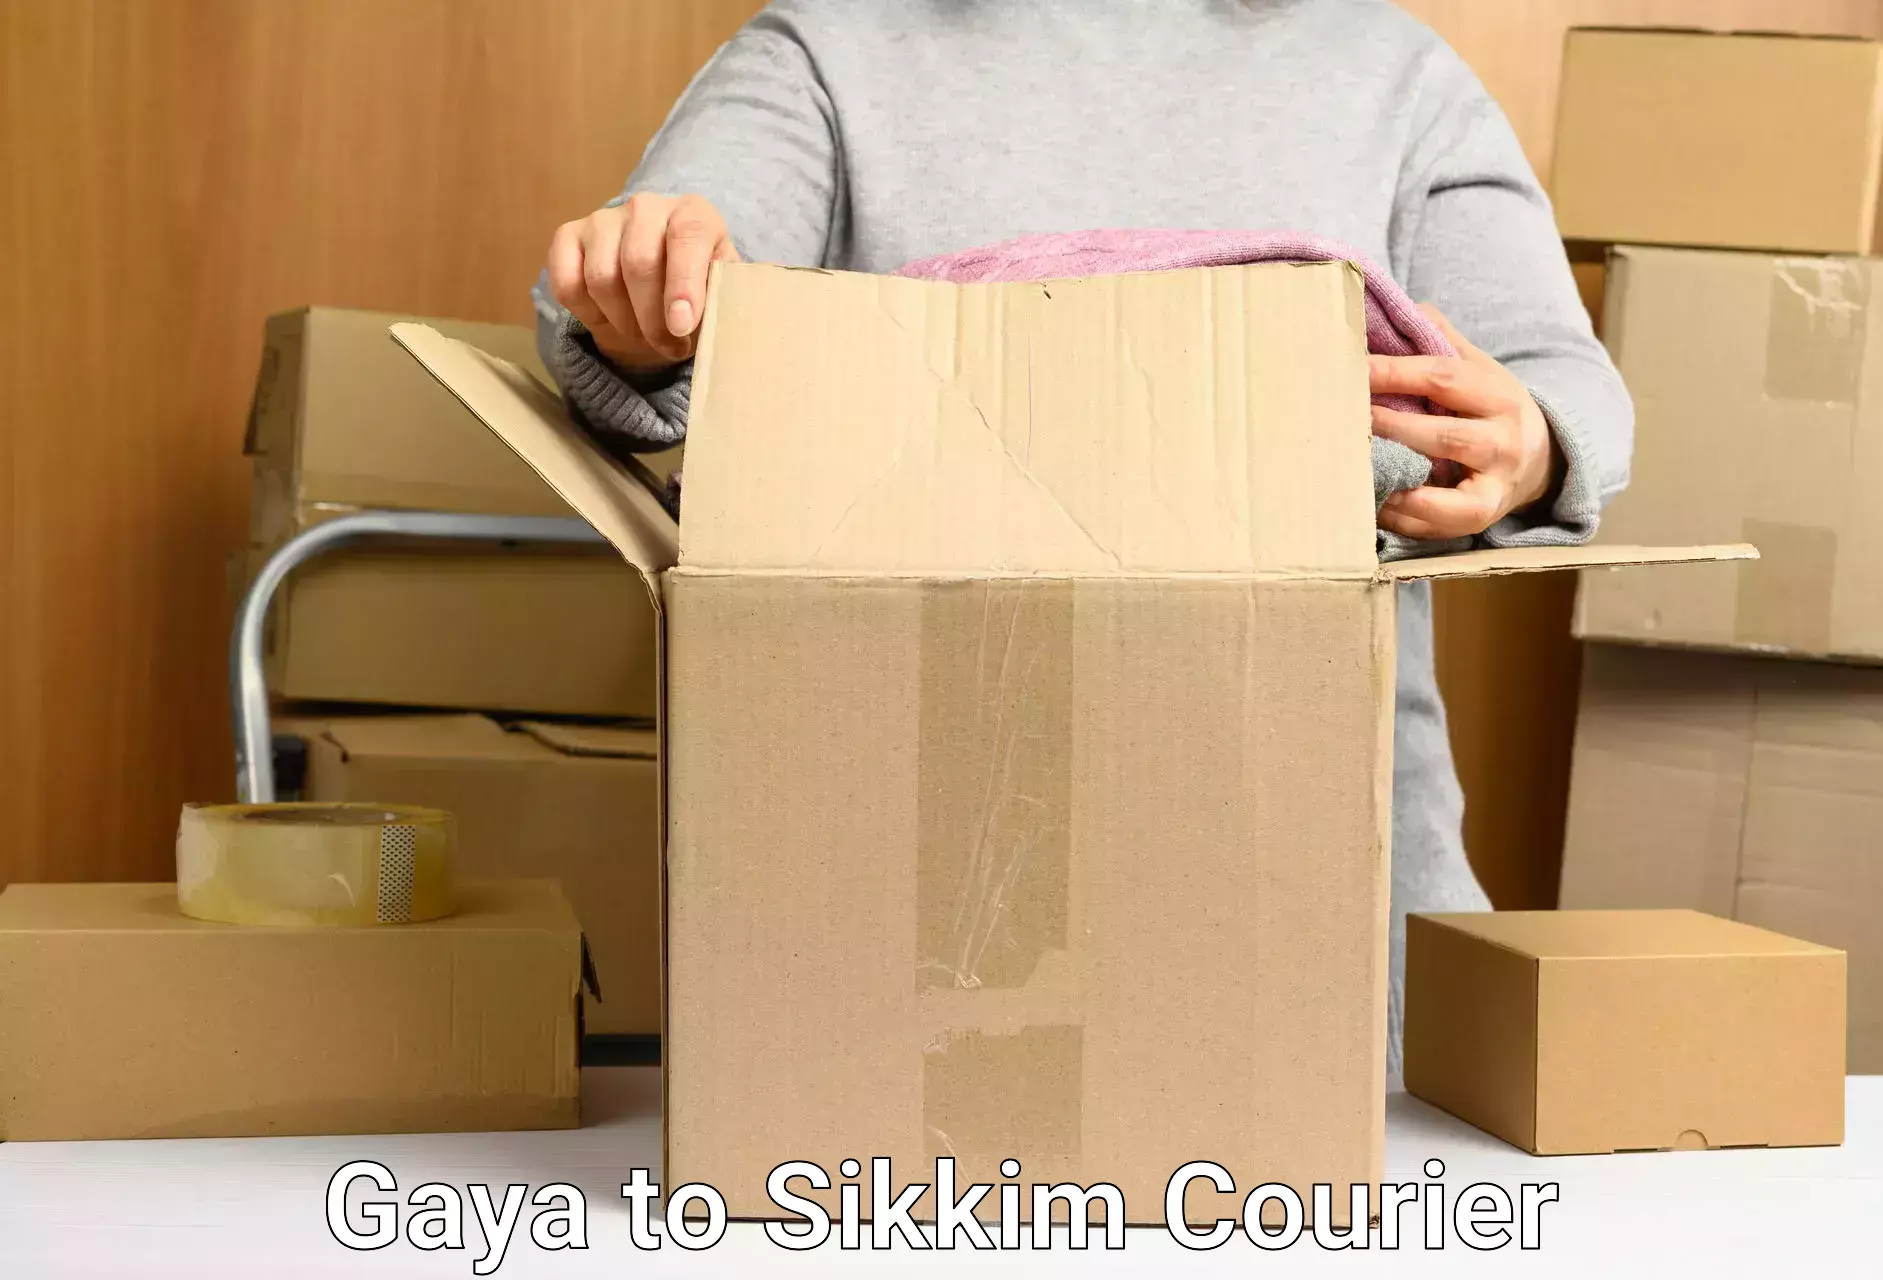 Track and trace shipping Gaya to Pelling